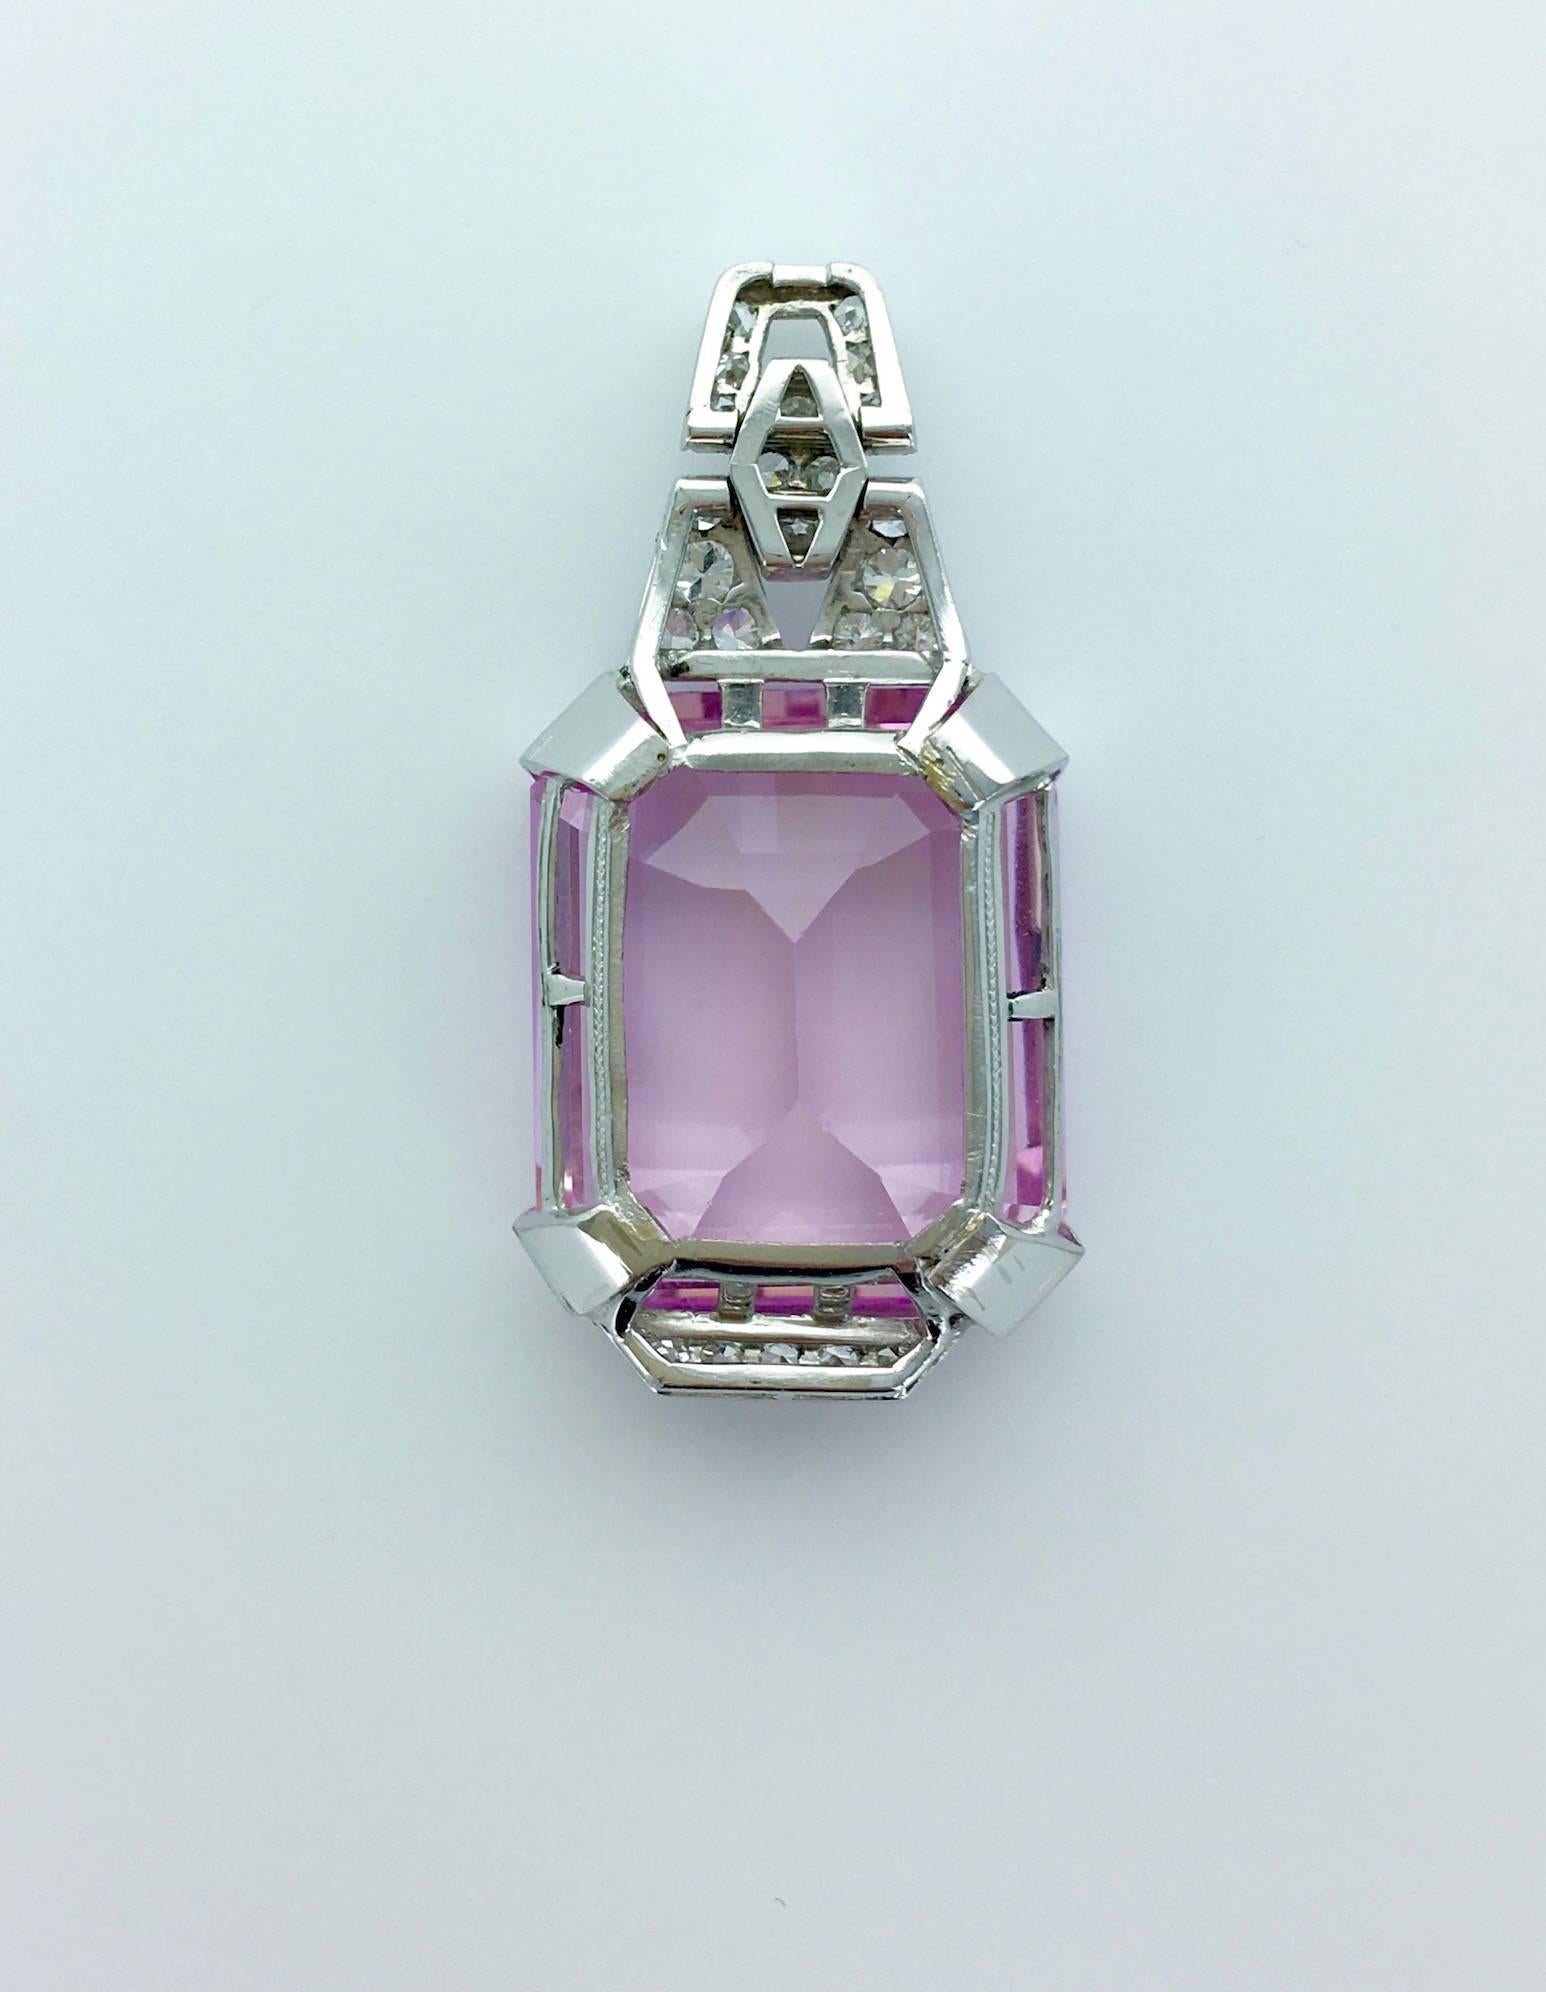 Impressive and Sweet Pink color Natural Morganite weighting 35.72 carats. The Pendant mounting in Diamond and Platinum.
Circa 1935.

The Morganite is accompanied by a Swiss Laboratory GemtechLab certificate.

Gross weight: 14.02 grams.